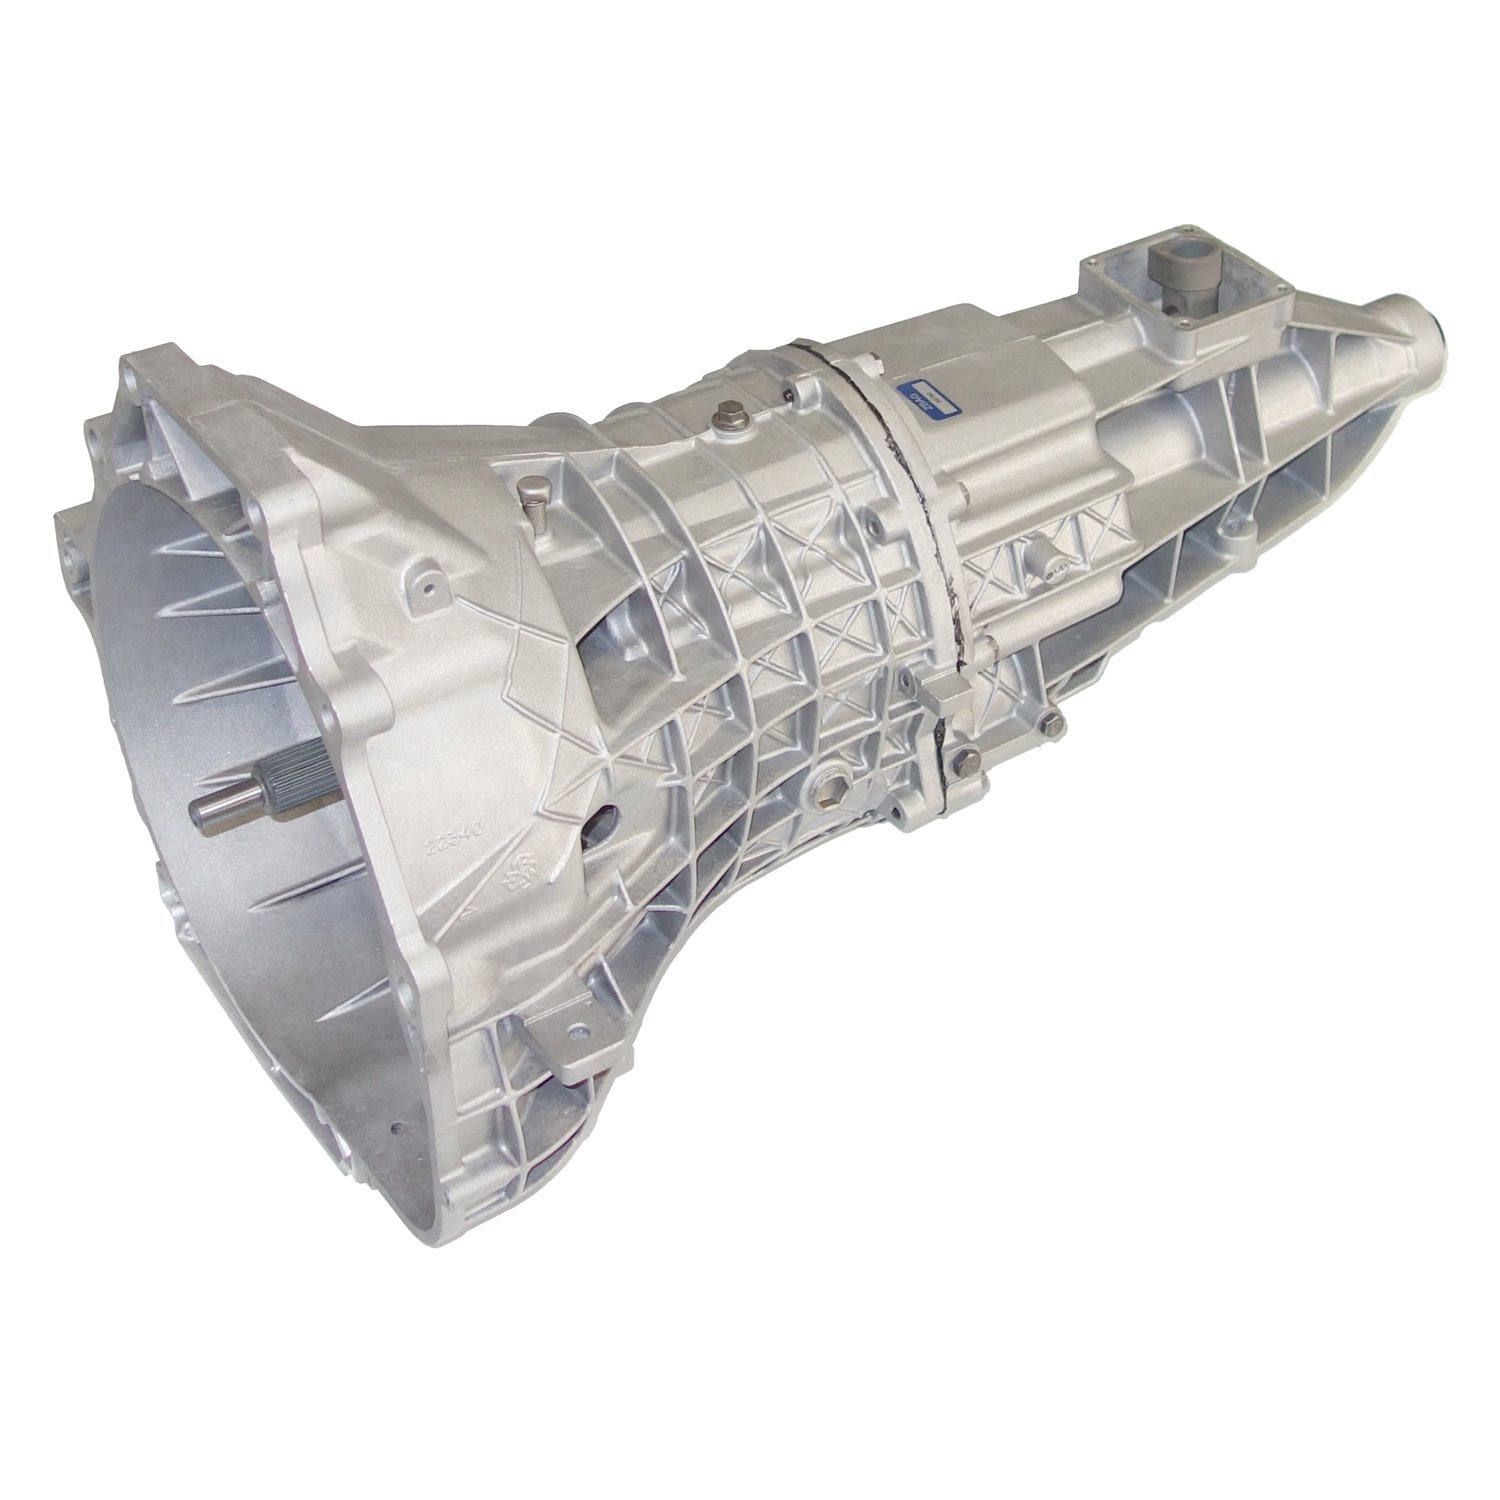 Remanufactured NV1500 Manual Transmission for Jeep 02-04 Liberty, 4x4, 5 Speed